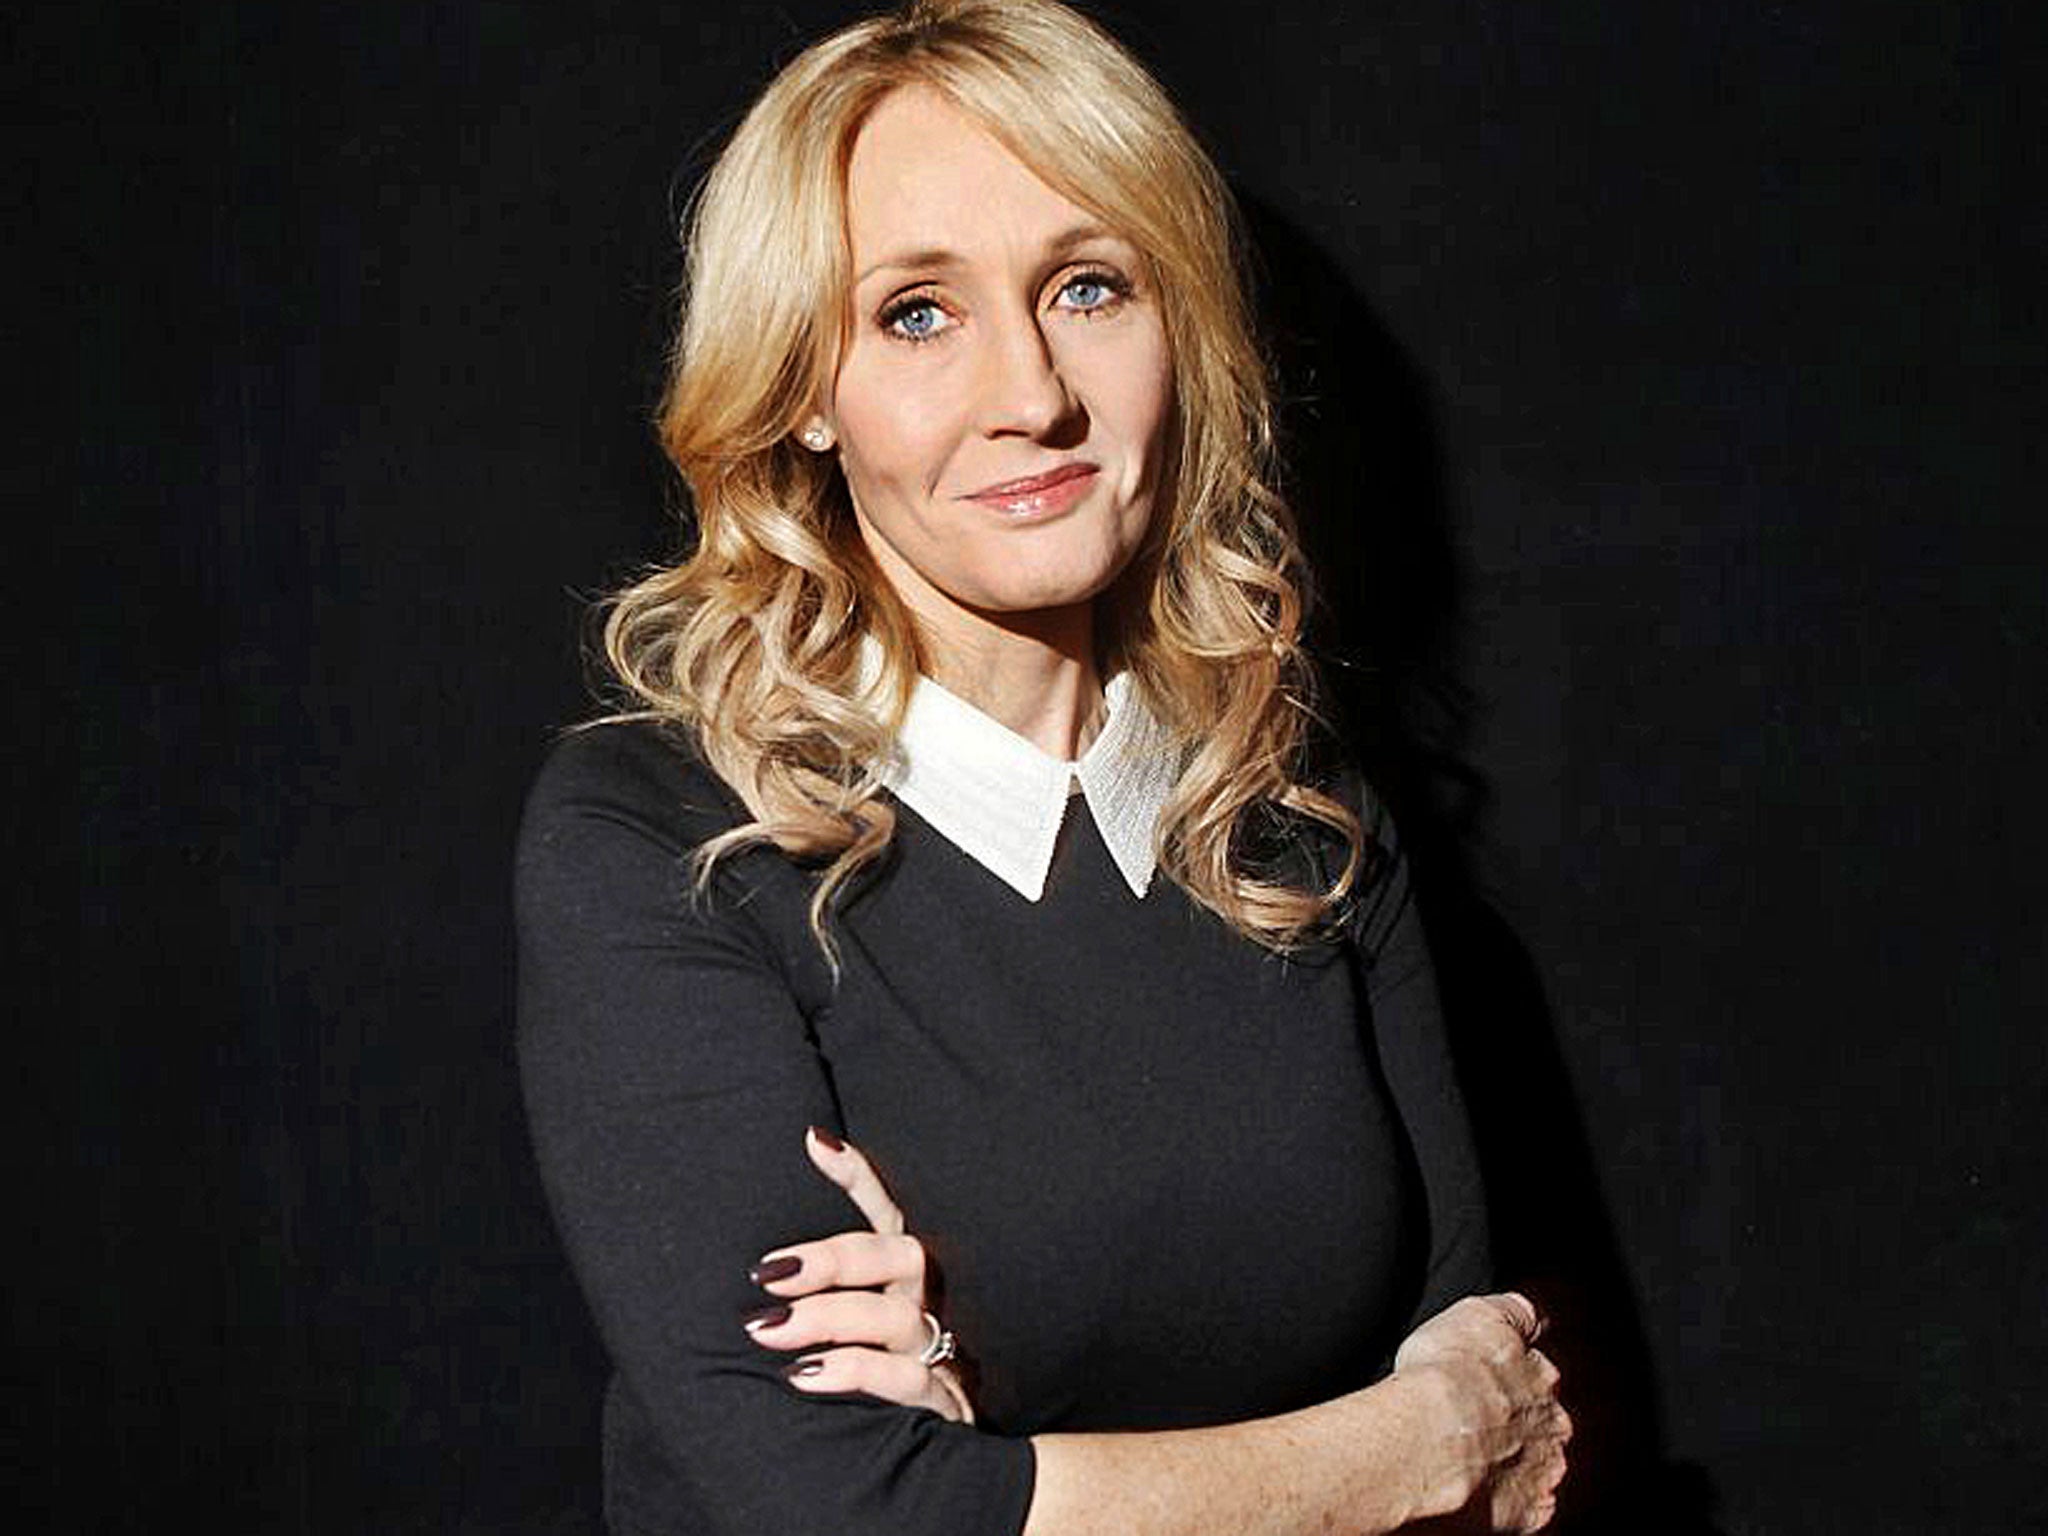 JK Rowling sent a message of support after Henry Fraser revealed the troll's comments